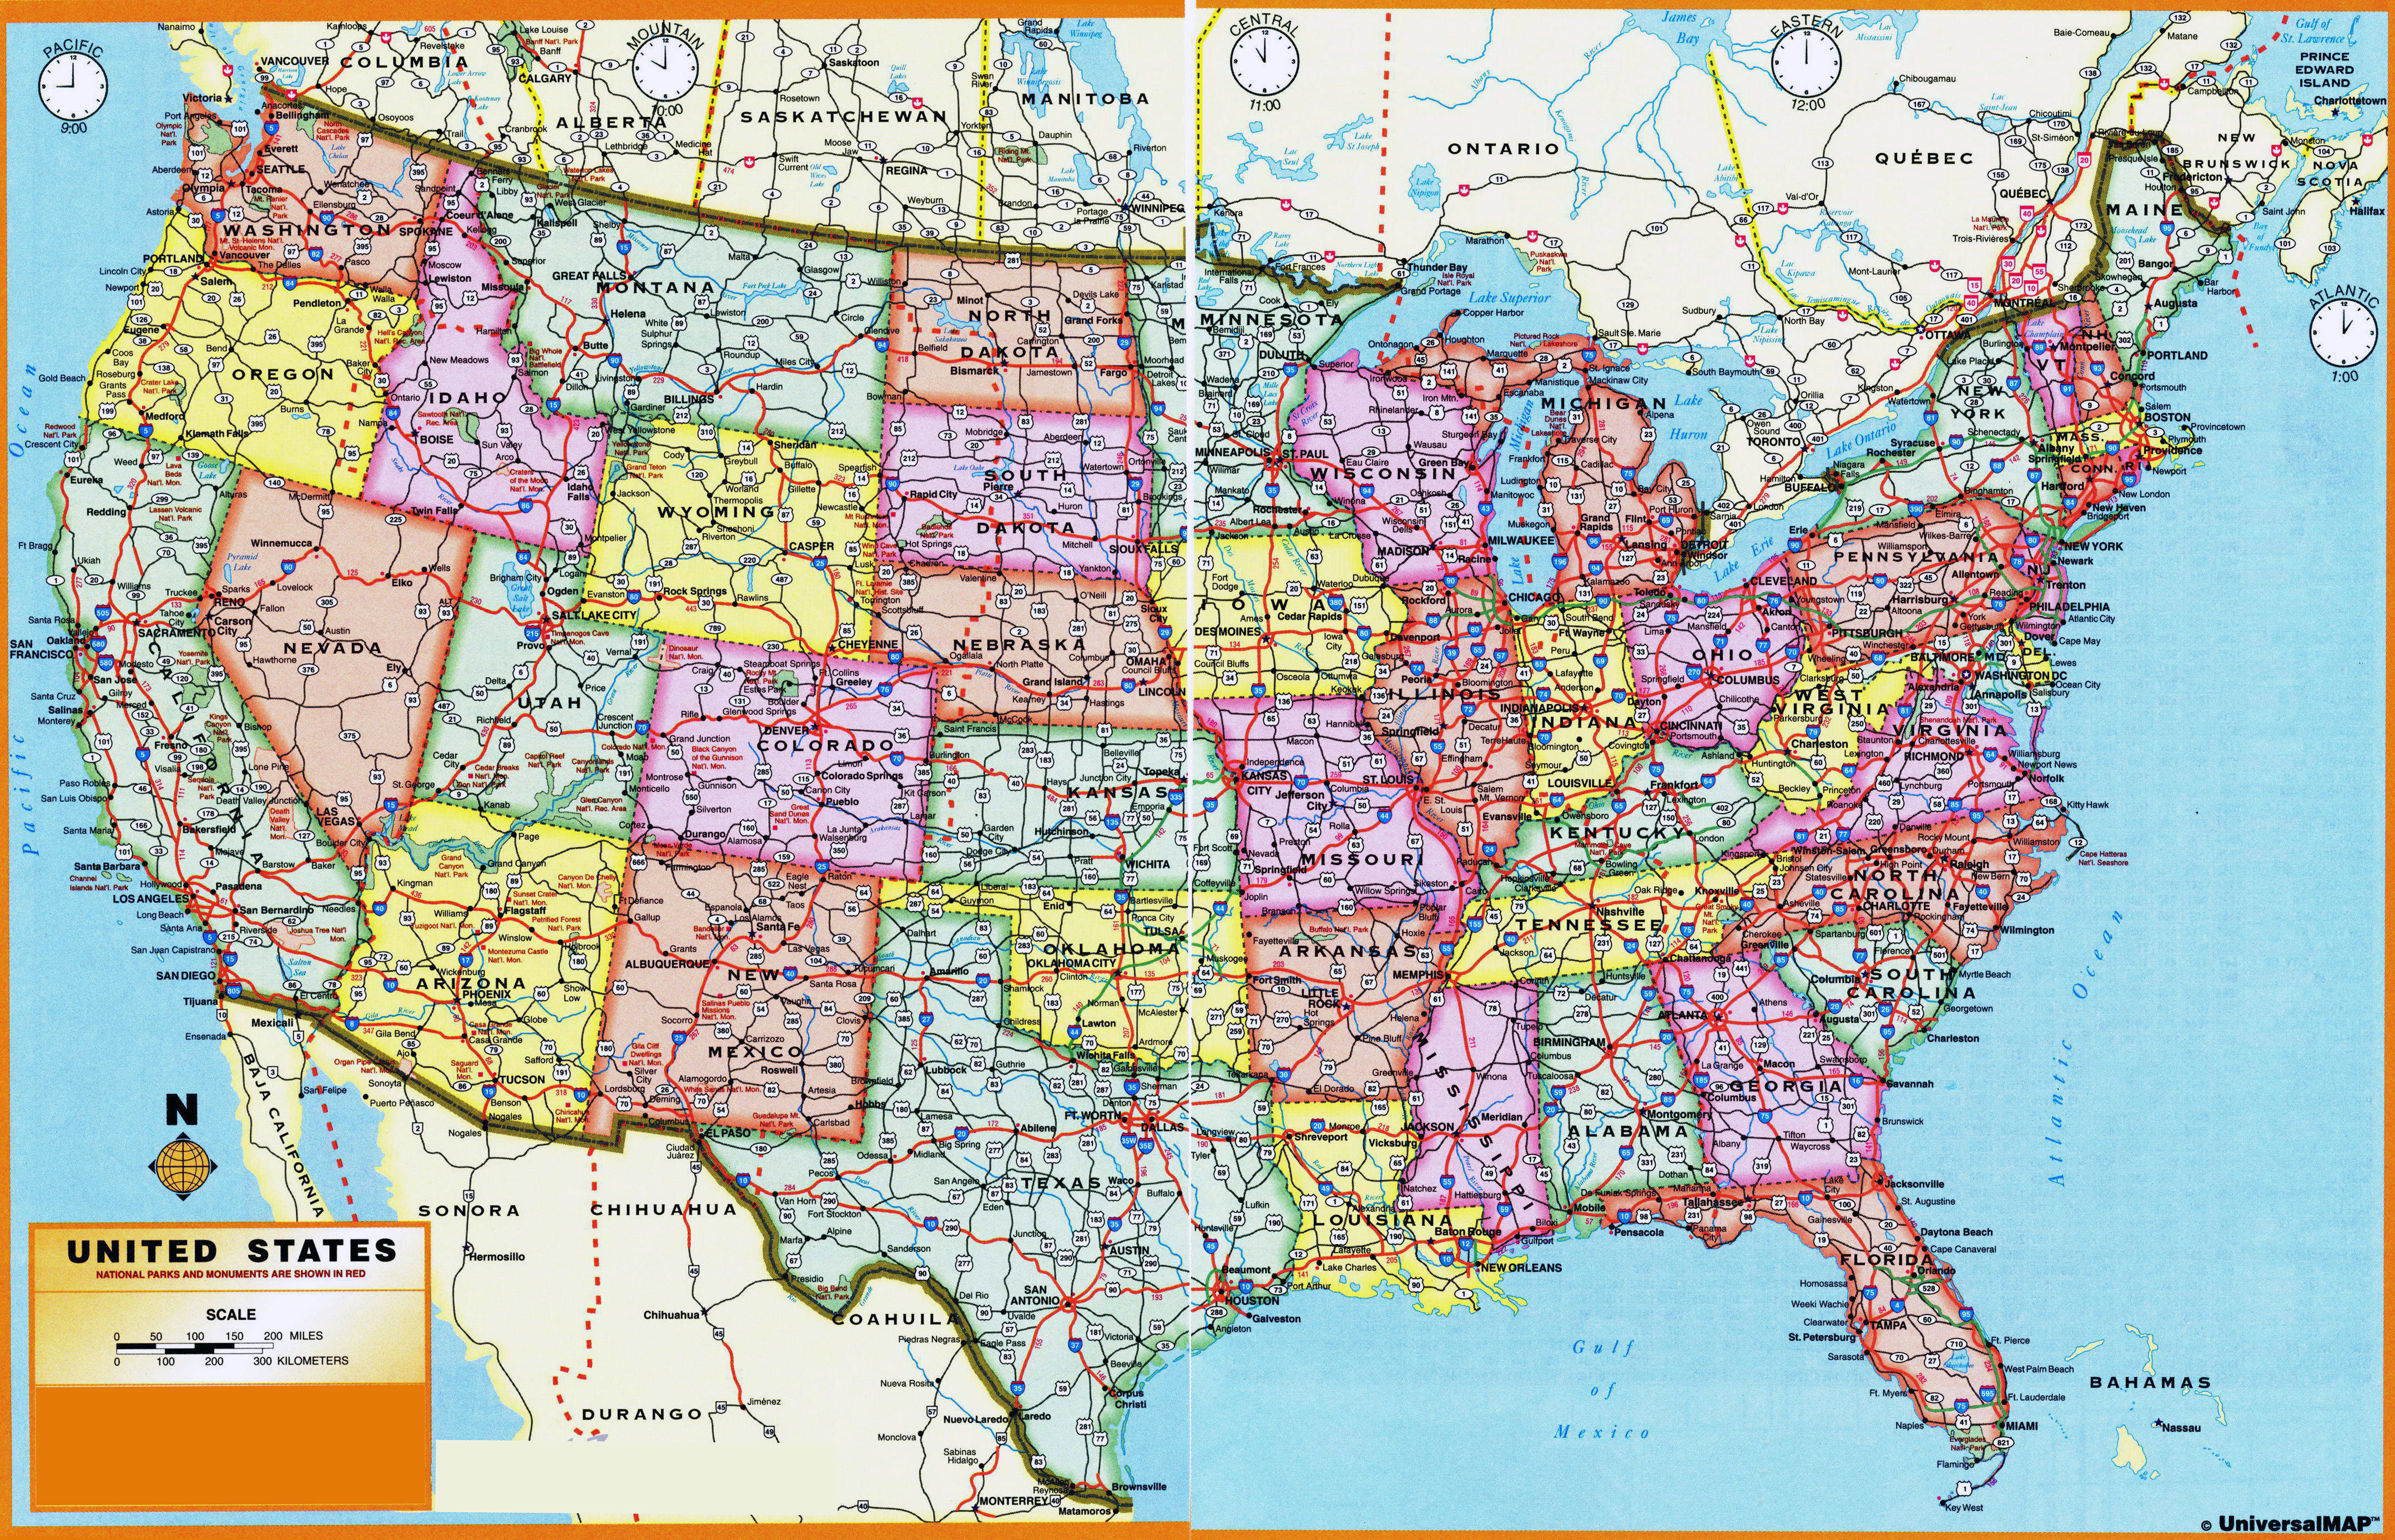 penting-13-us-maps-with-states-and-cities-and-highways-viral